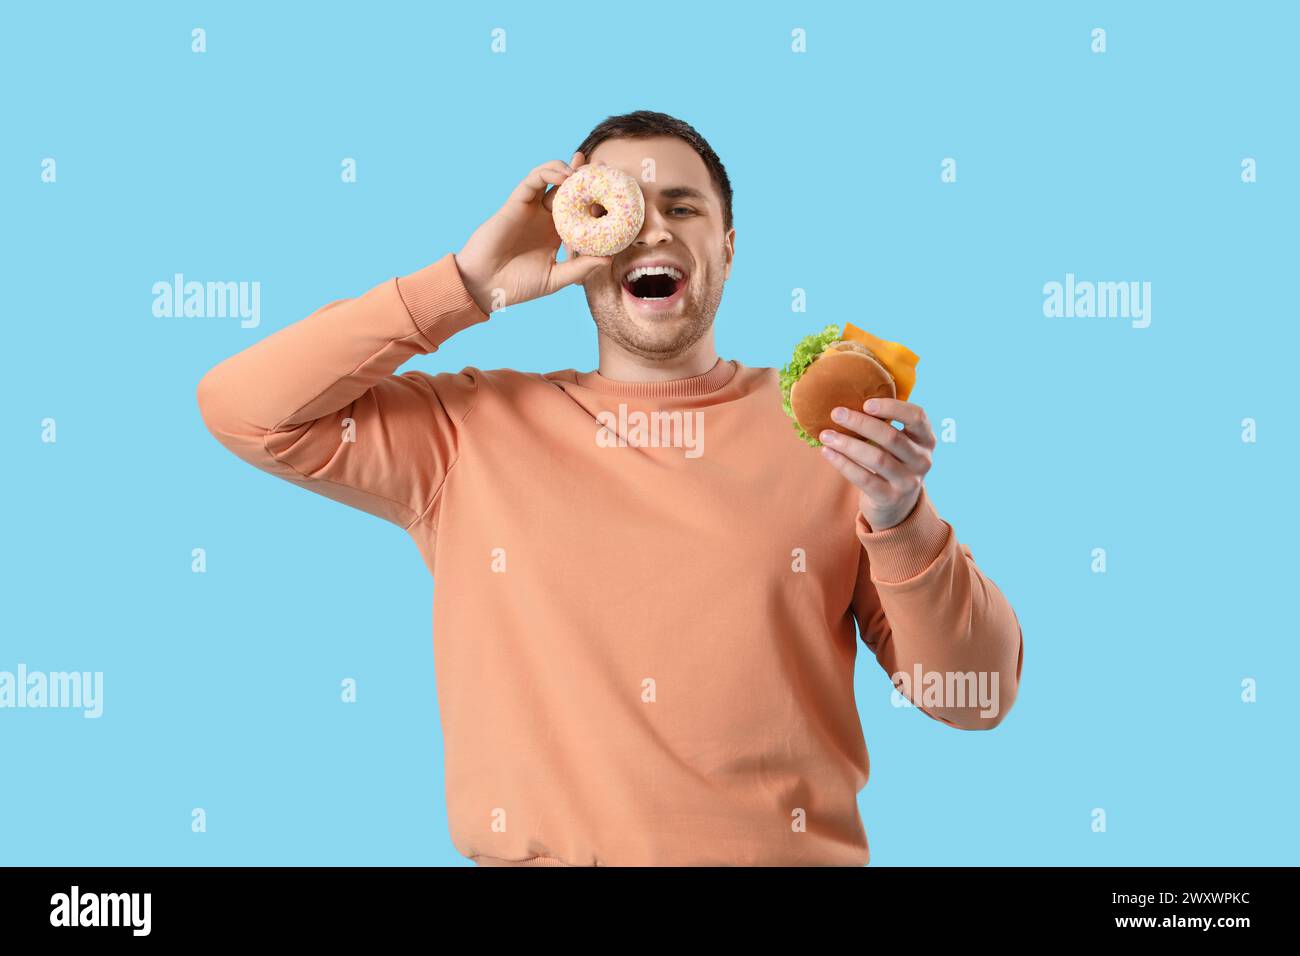 Young man with doughnut and burger on blue background. Overeating concept Stock Photo